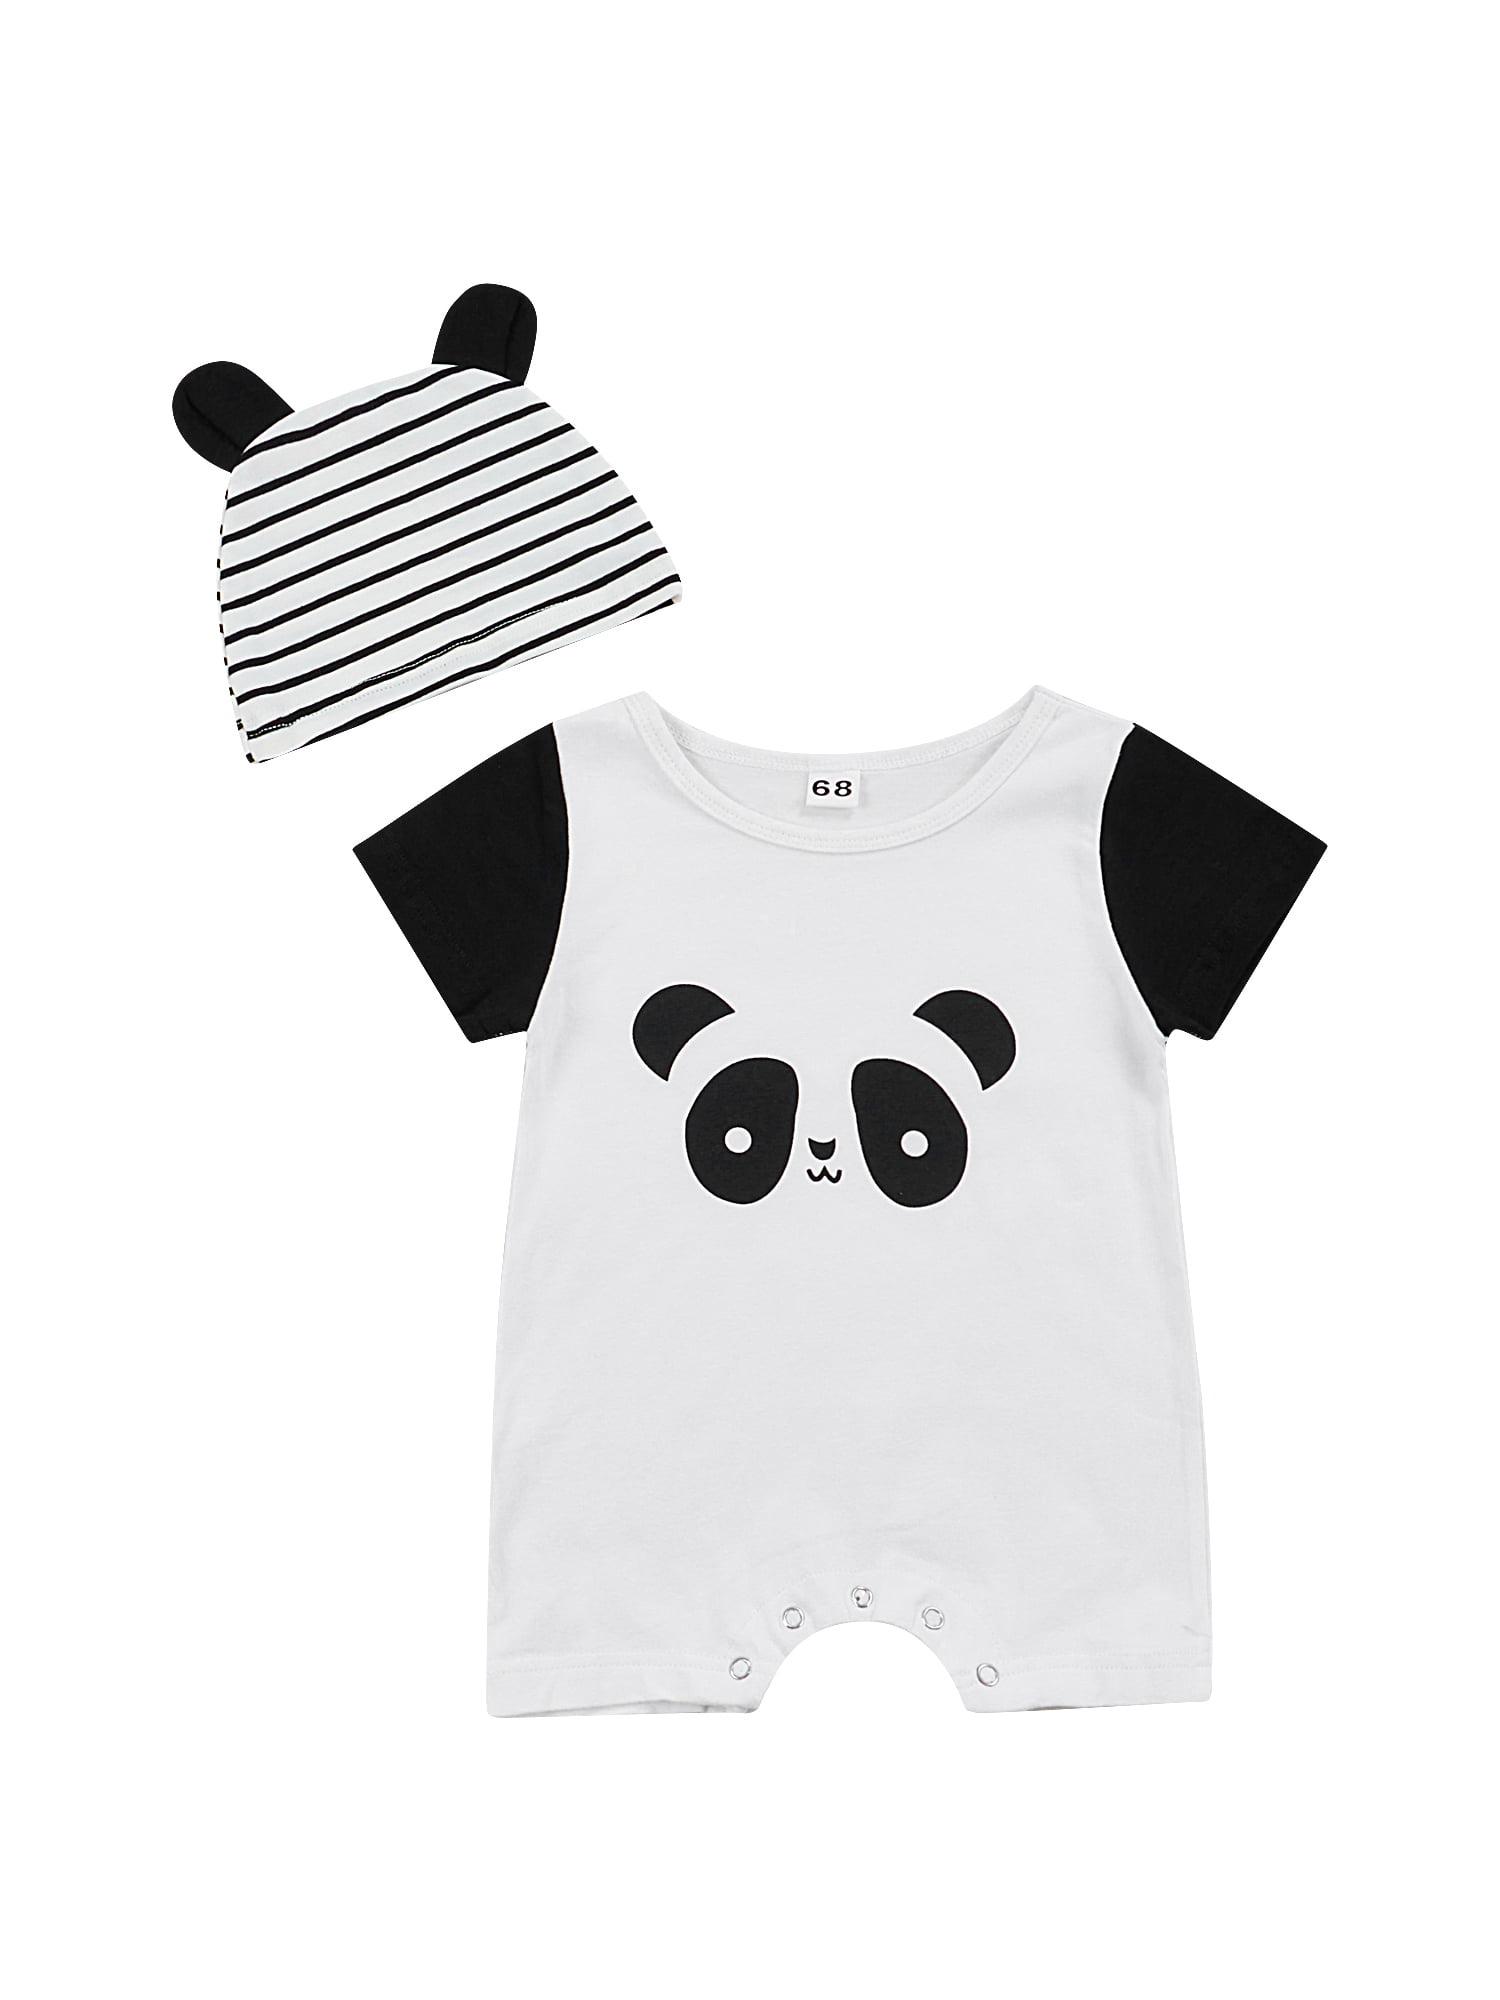 Paw Print with Heart Baby Boy Girl Newborn Short Sleeve T Shirts 6-24 Month Soft Tops 